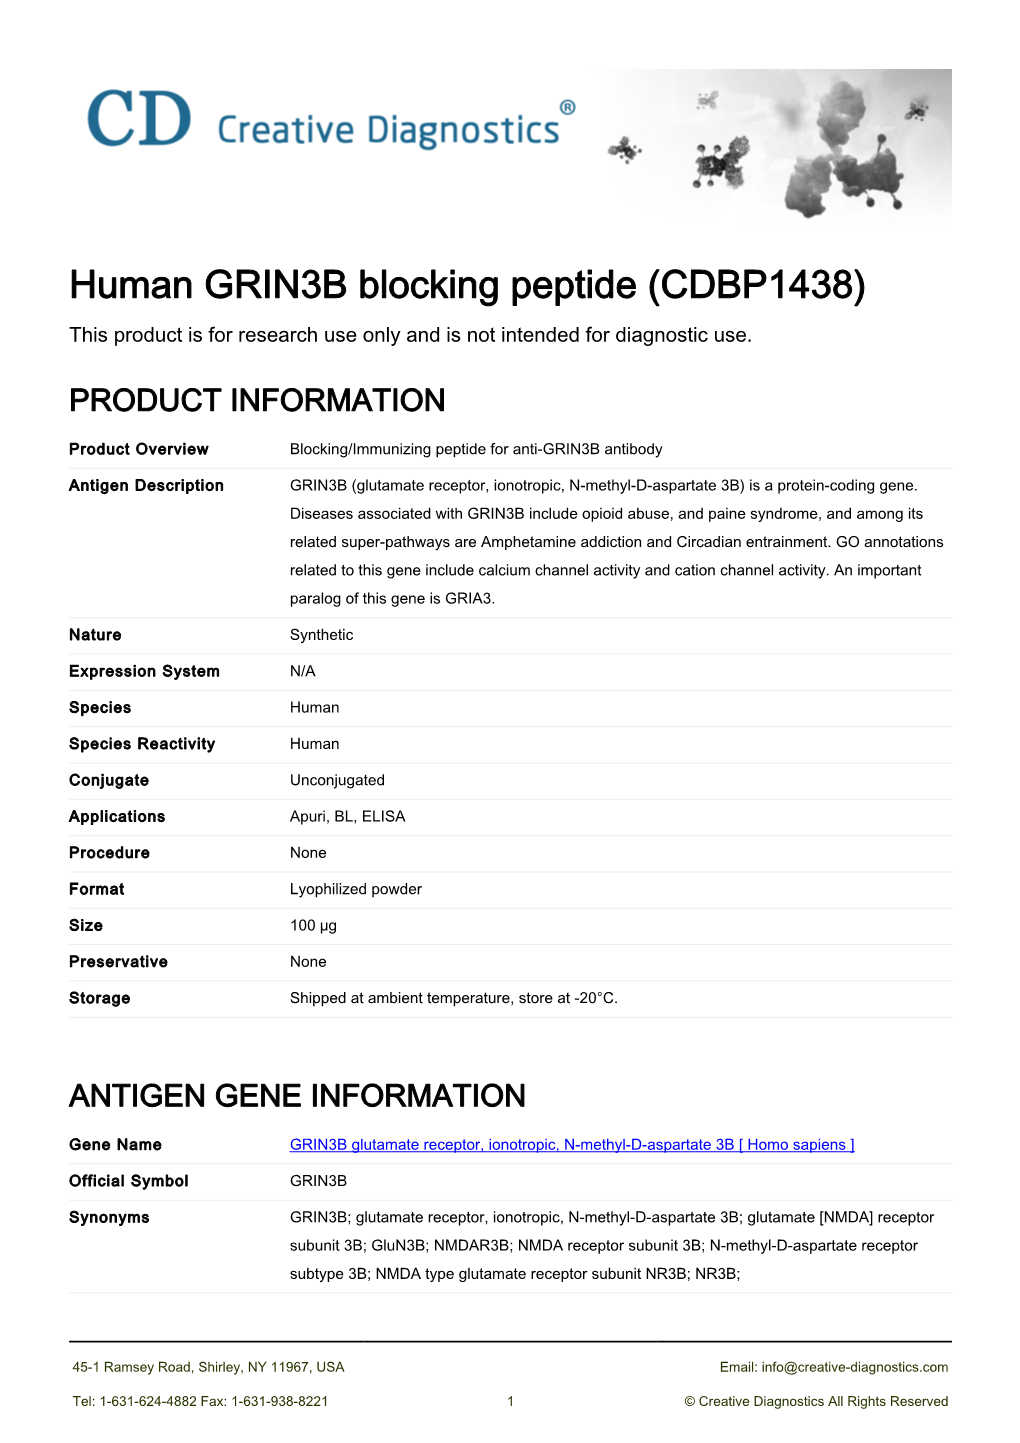 Human GRIN3B Blocking Peptide (CDBP1438) This Product Is for Research Use Only and Is Not Intended for Diagnostic Use